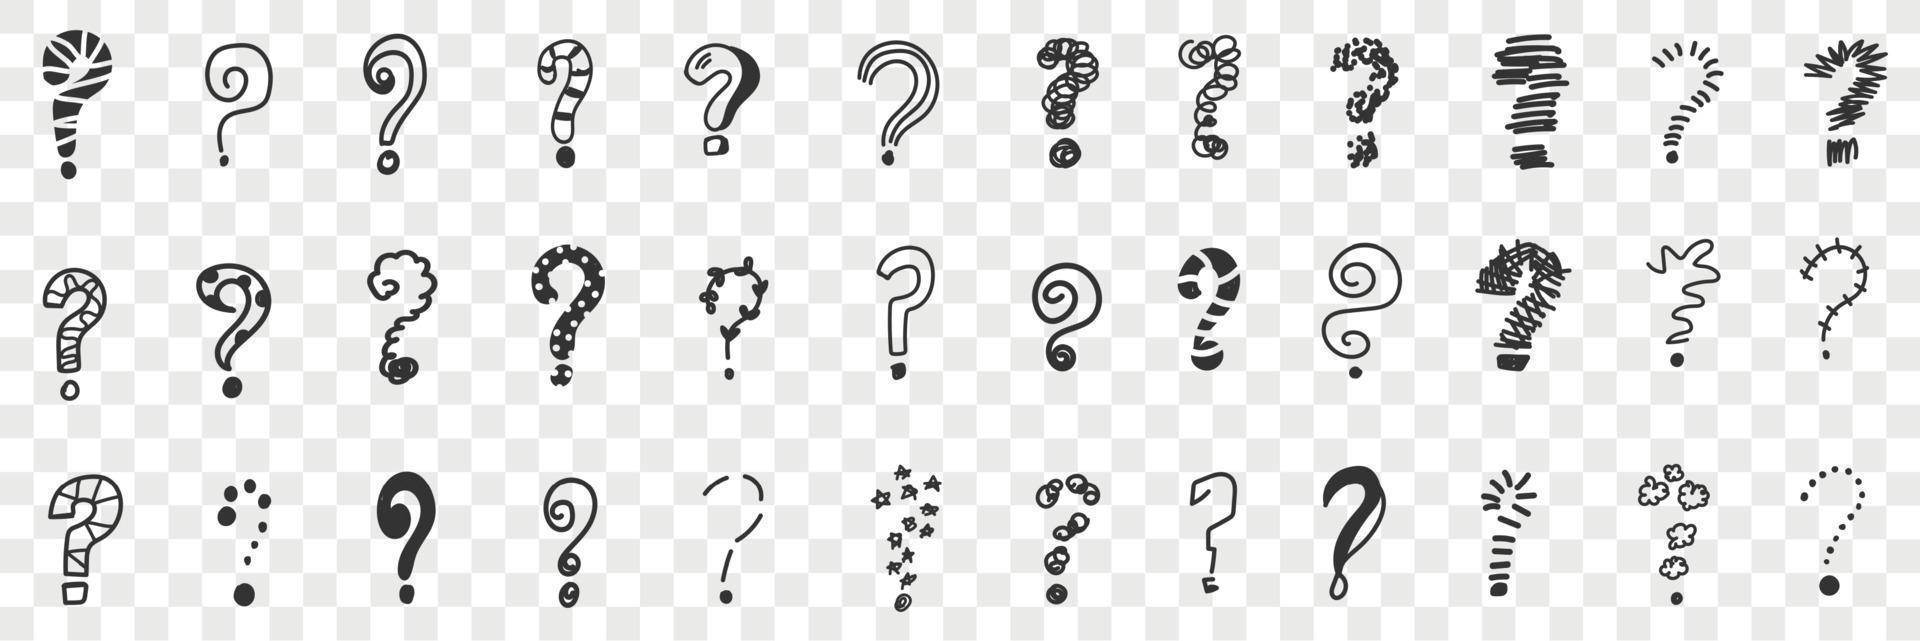 Question marks in row doodle set. Collection of hand drawn various shapes and forms of question marks drawn in different styles isolated on transparent background vector